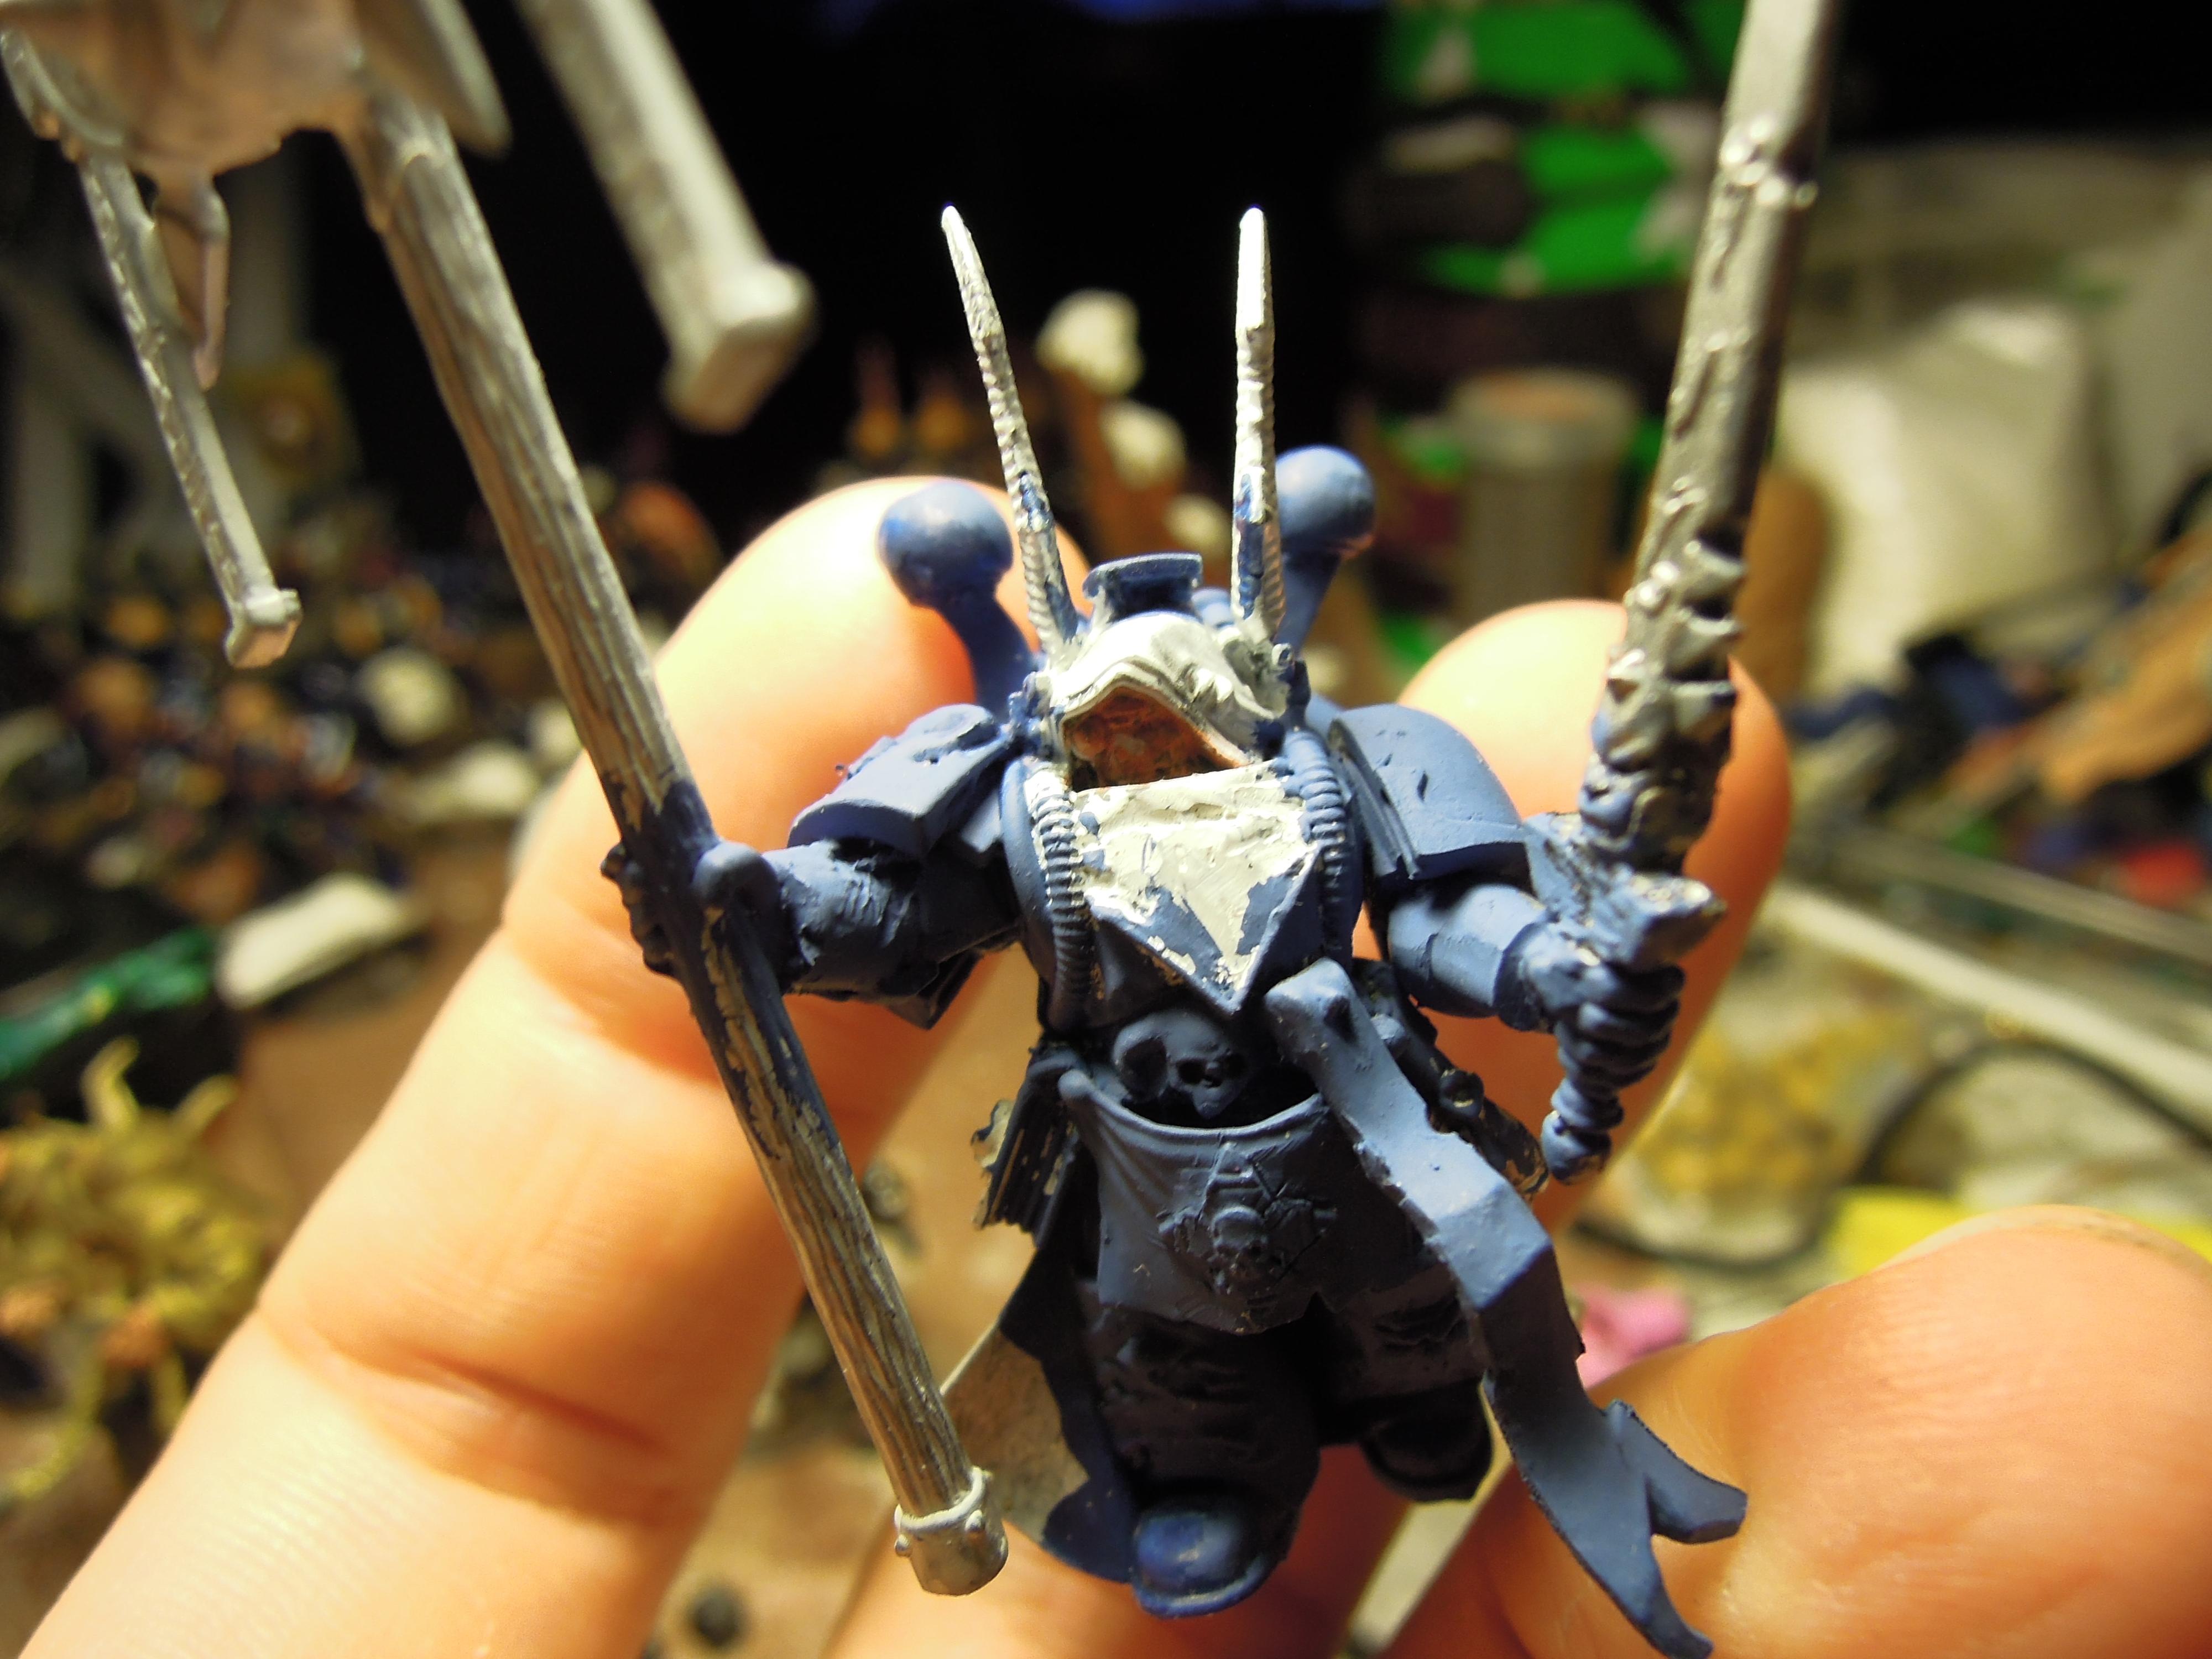 All Is Dust, Banner, Chaos, Chaos Space Marines, Conversion, Dark Vengeance, Heresy, Heretic Astartes, Infantry, Sorcerer, Sword, Thousand Sons, Traitor Legions, Tzeentch, Warhammer 40,000, Work In Progress